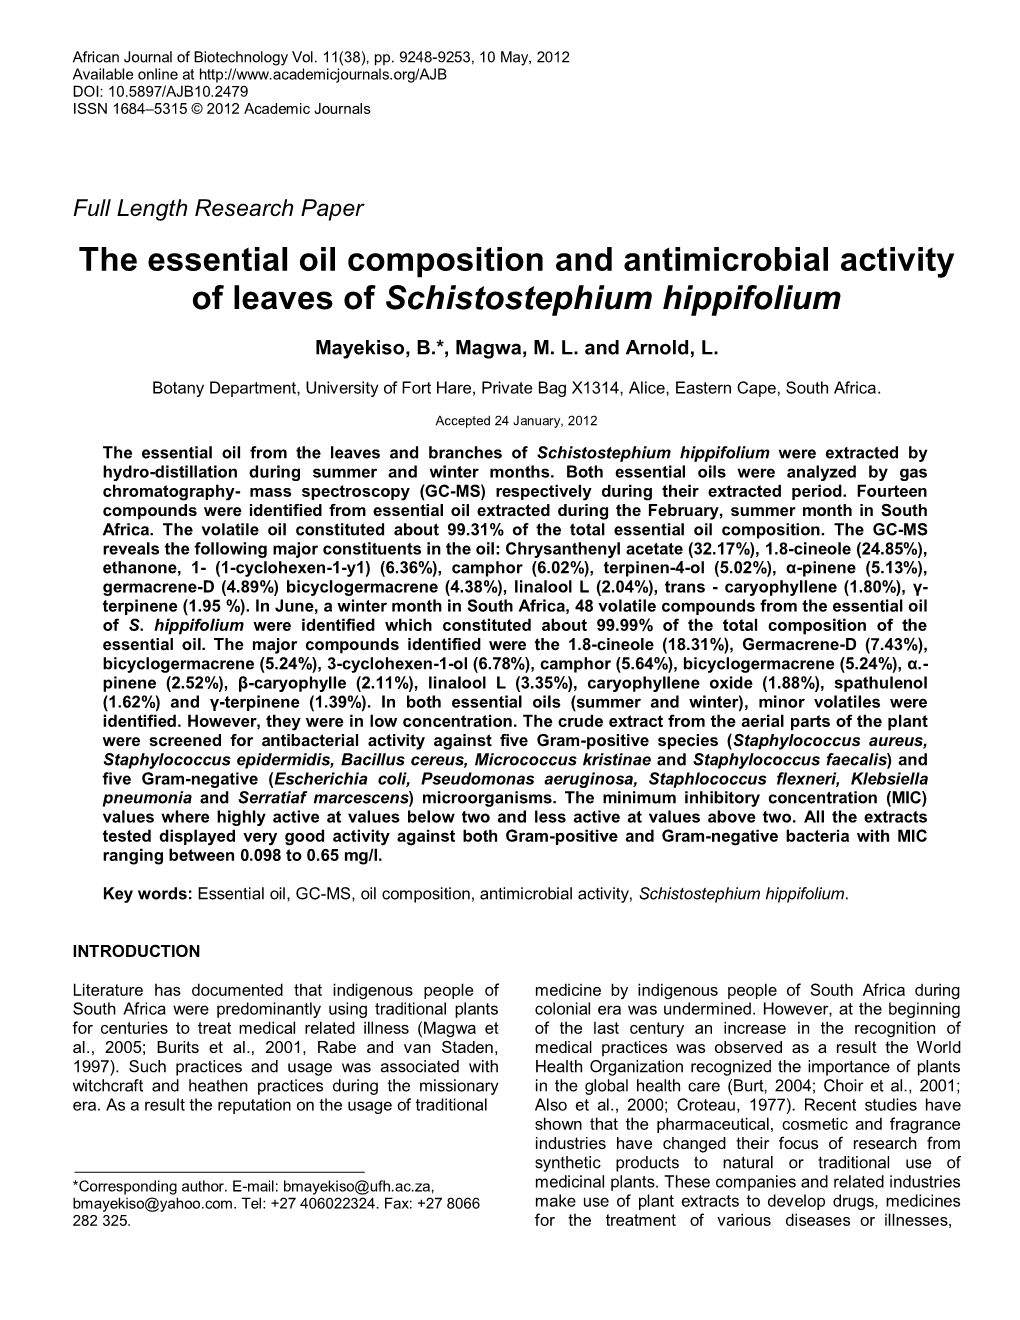 The Essential Oil Composition and Antimicrobial Activity of Leaves of Schistostephium Hippifolium